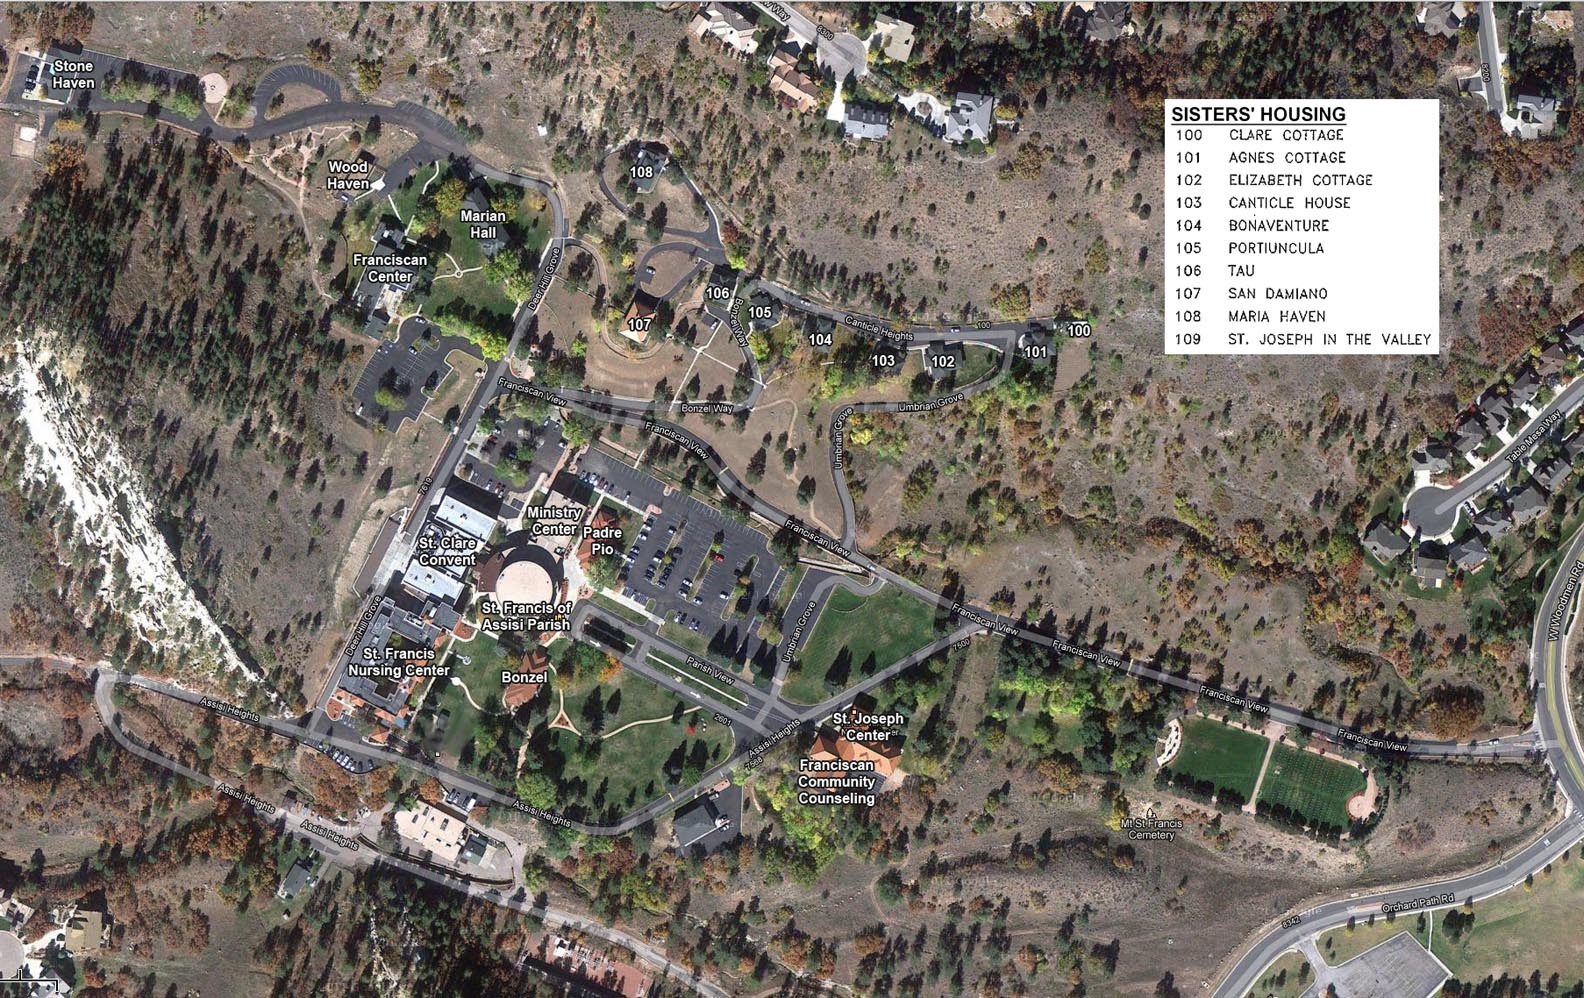 Aerial map of St. Francis